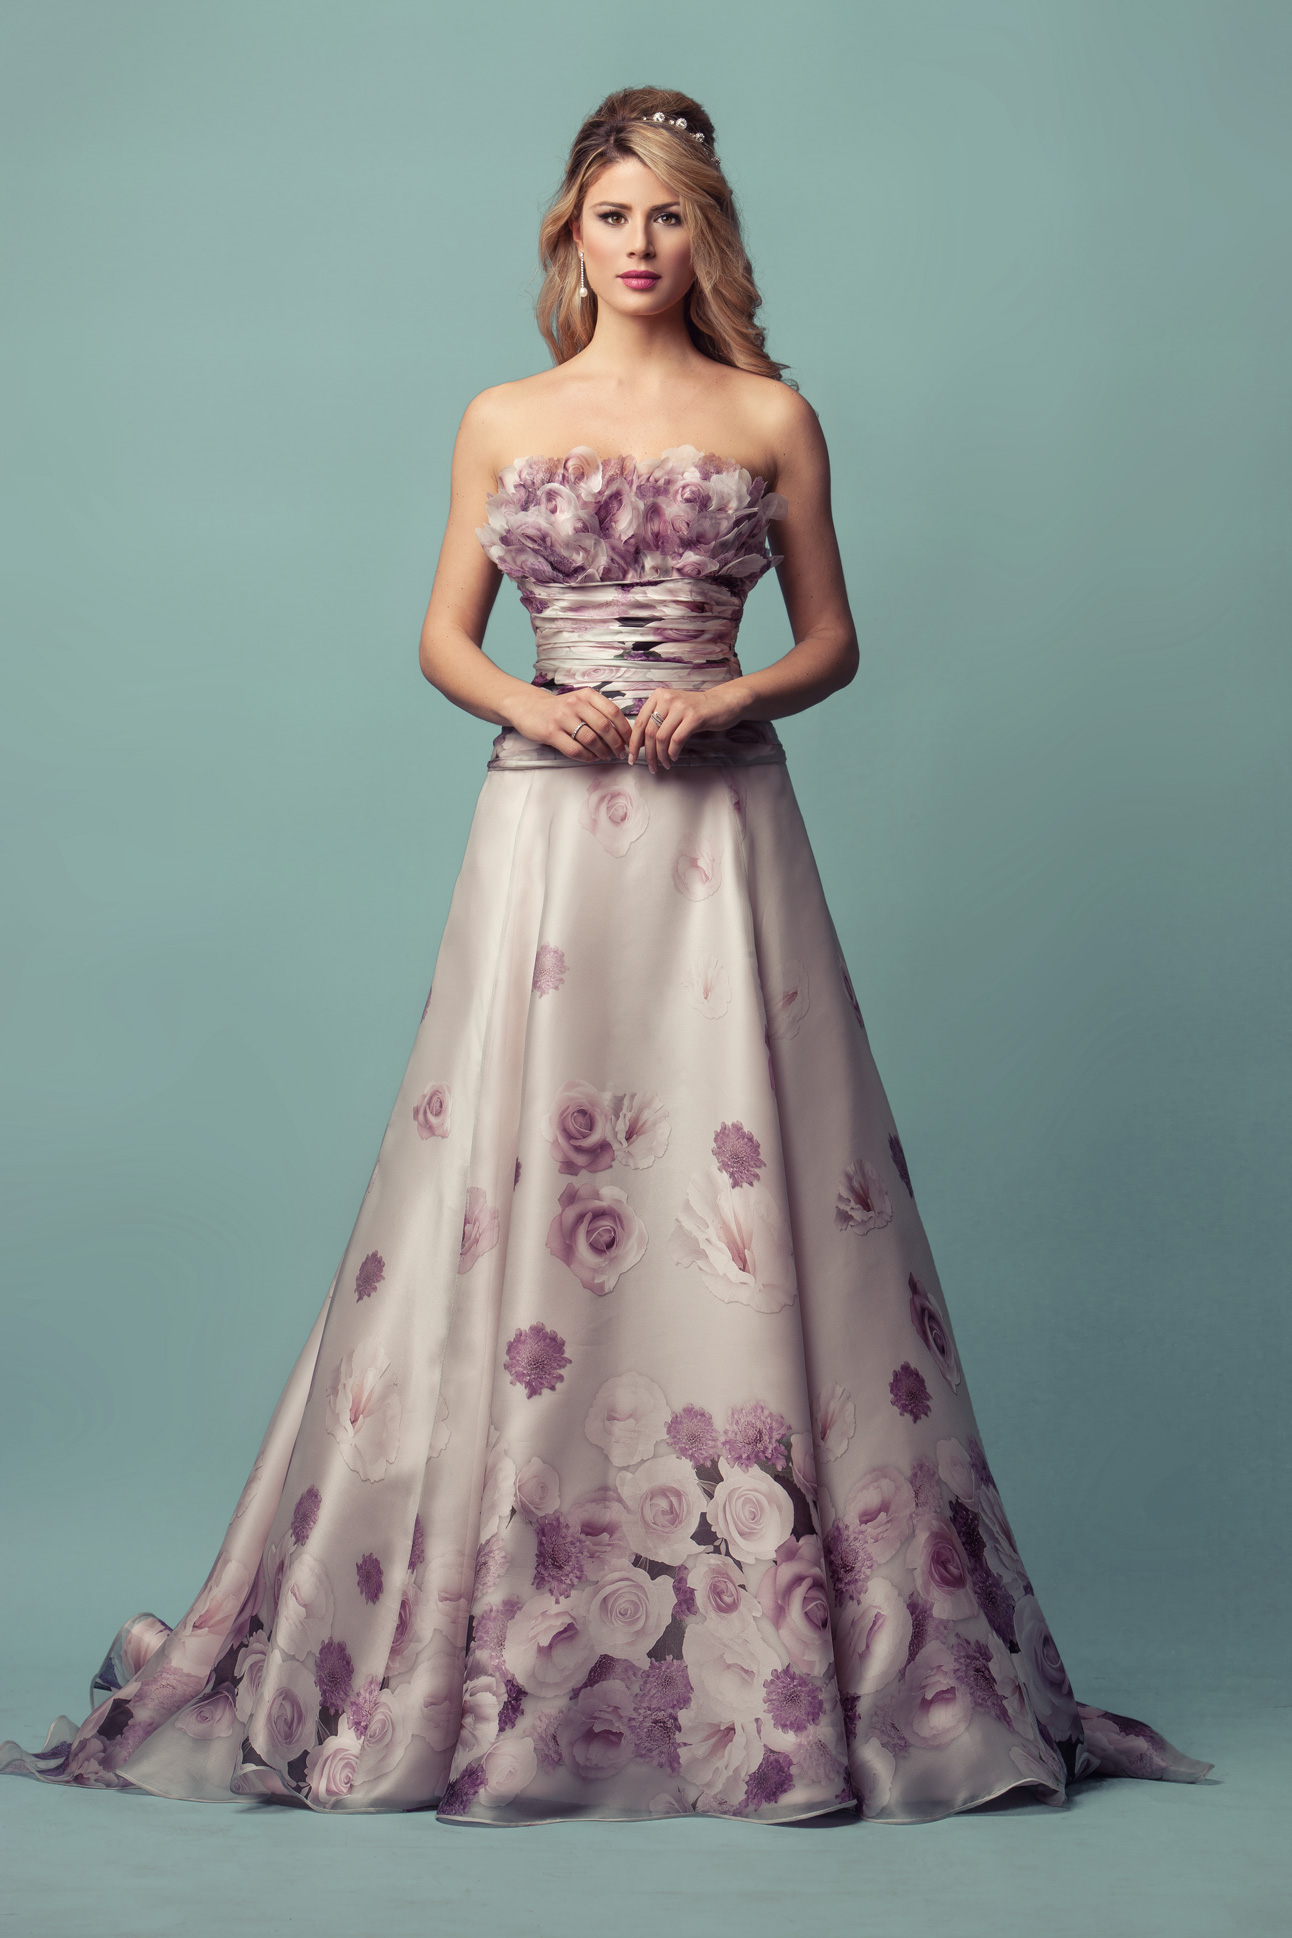 H M DESIGNER STUDIO | Make an entrance worthy of the red carpet in this  dreamy pink-hued ball gown, from our luxurious #designergowns collection,  exclusively a... | Instagram